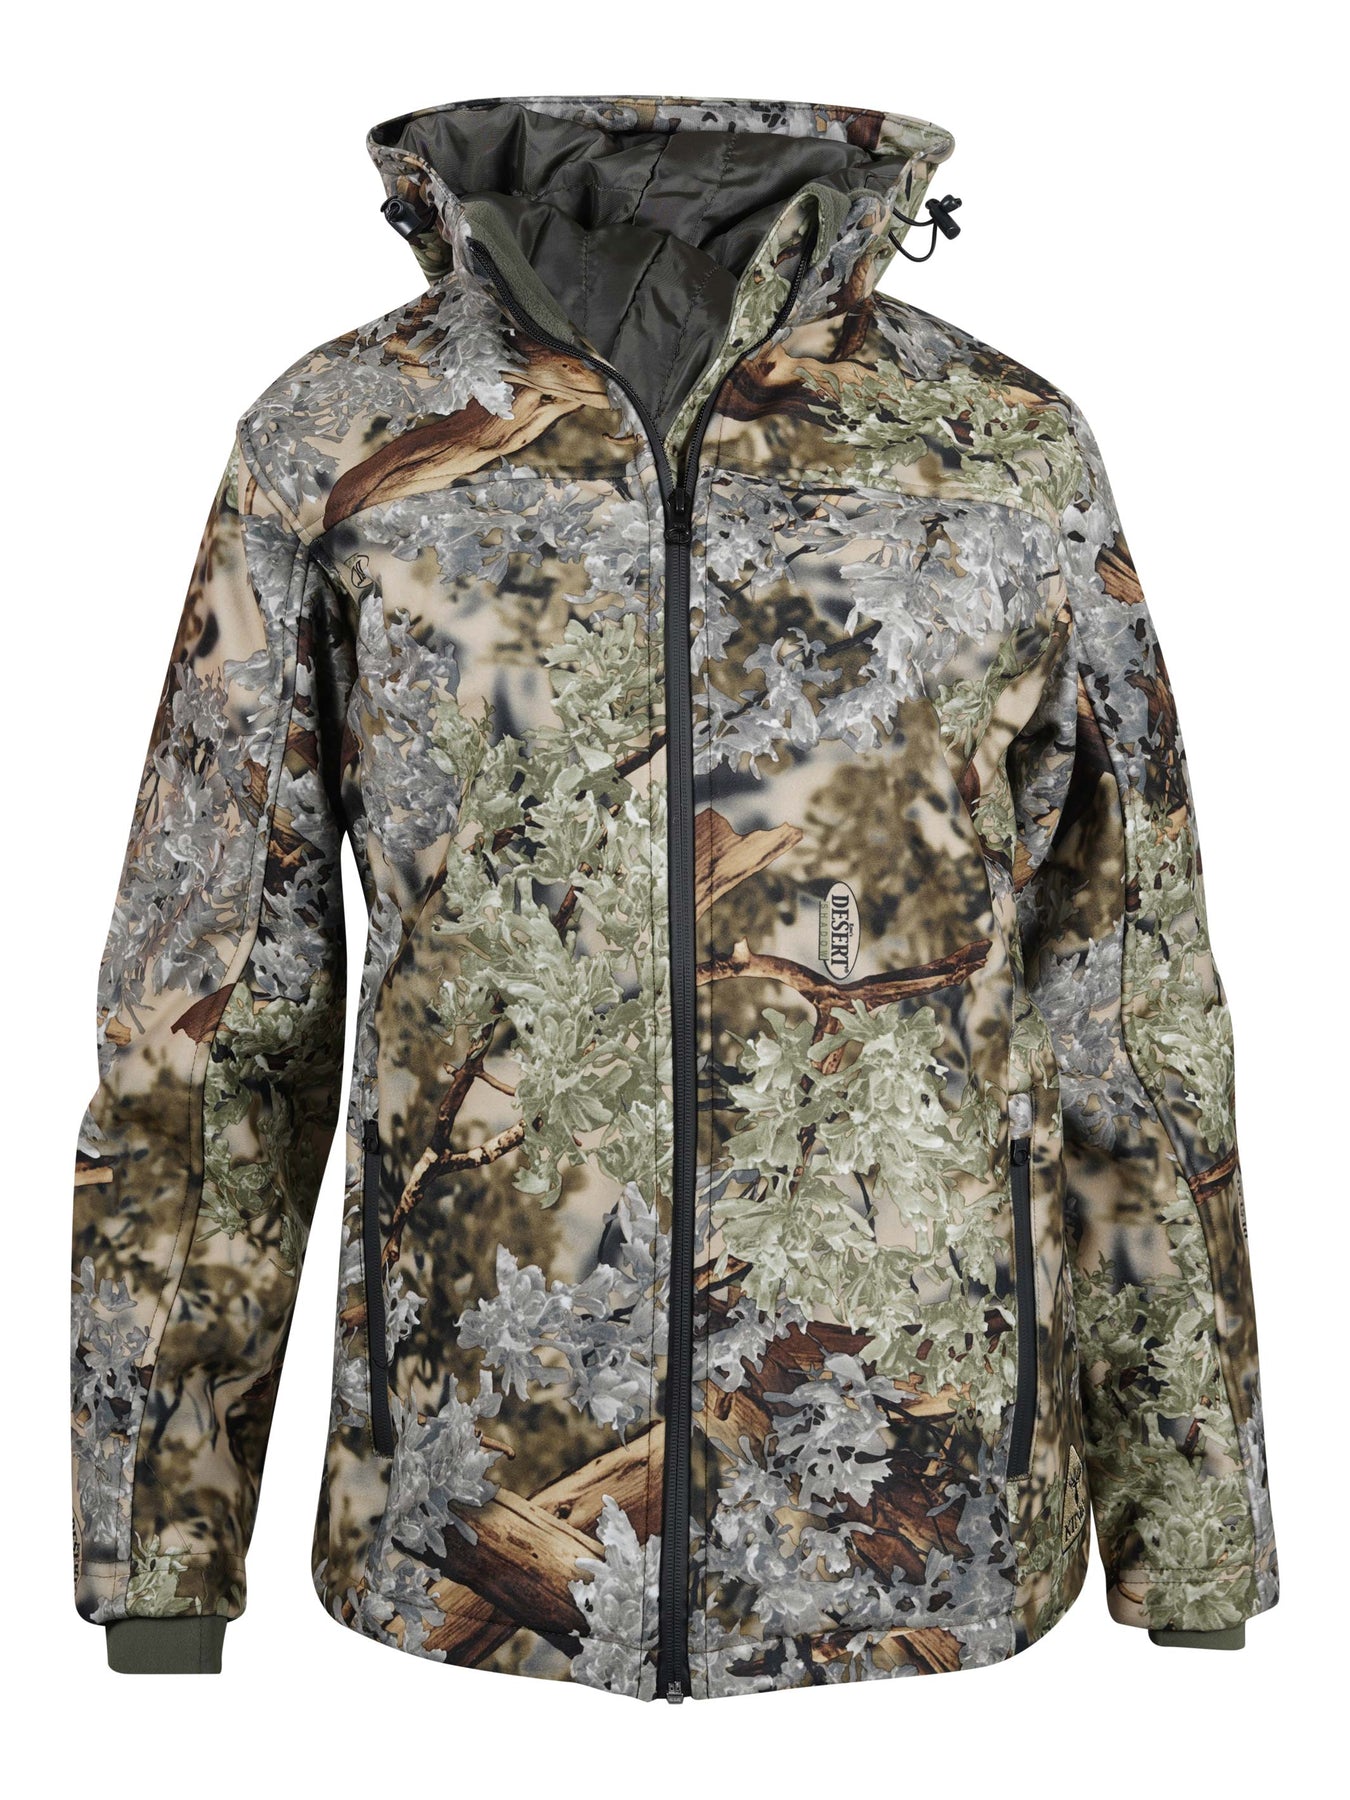 Women's Weather Pro Insulated Jacket in Desert Shadow | King's Camo